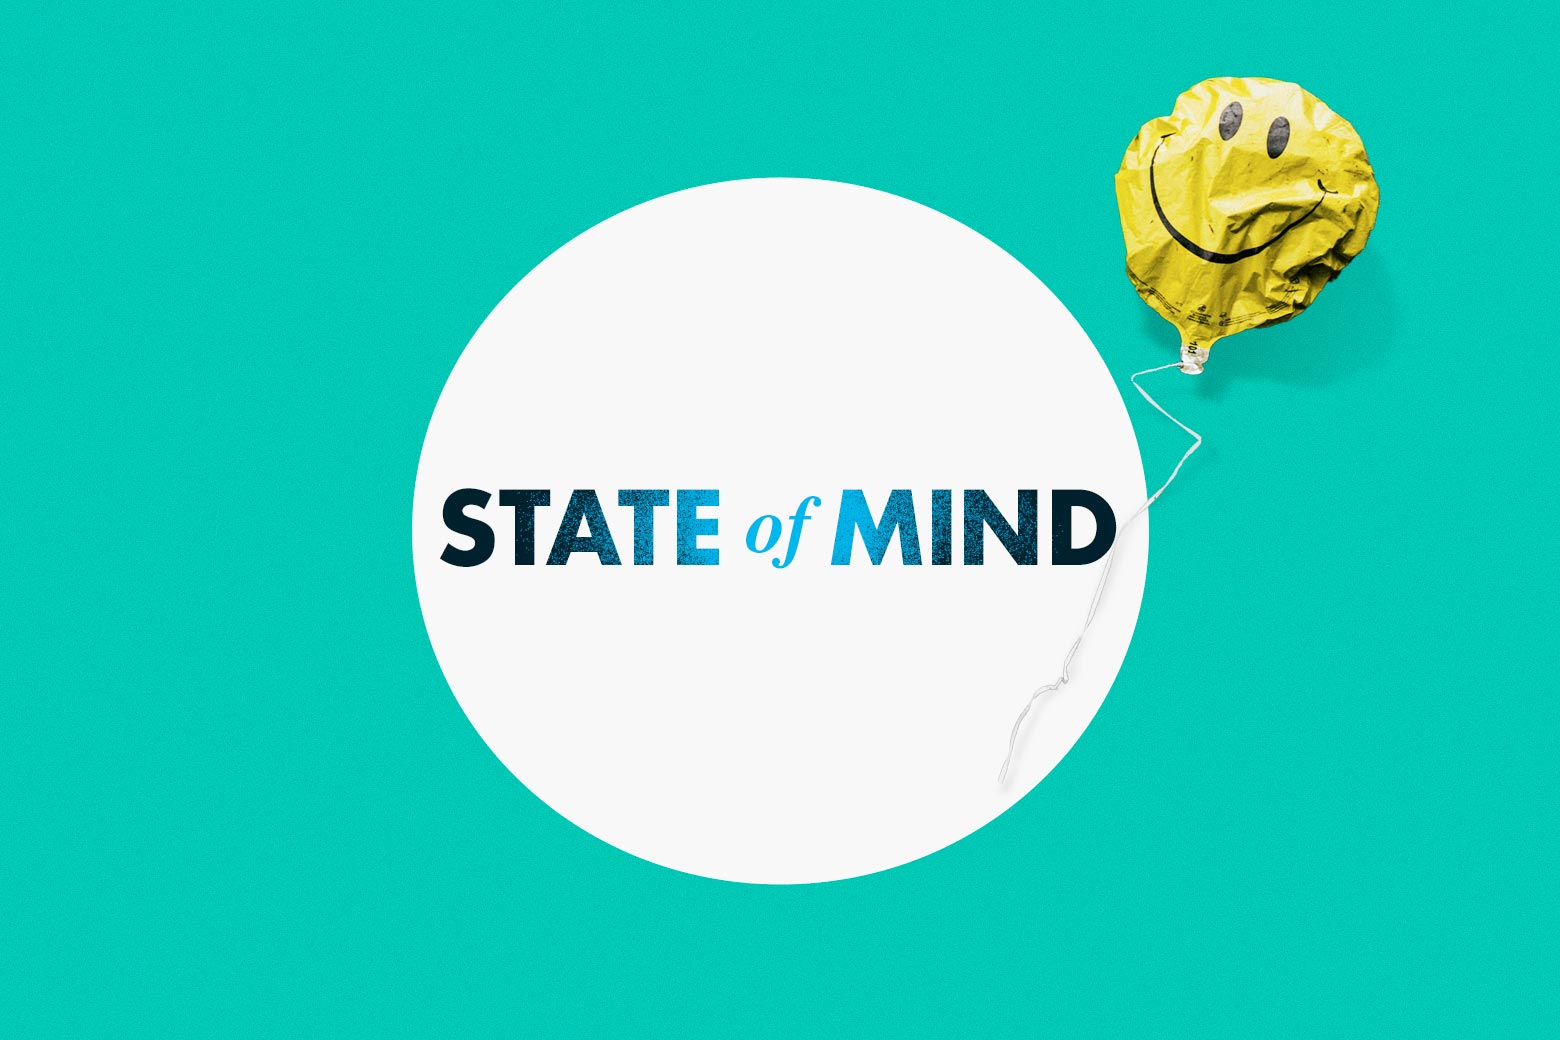 The words "State of Mind" appear in a white circle next to a deflated happy-face balloon.